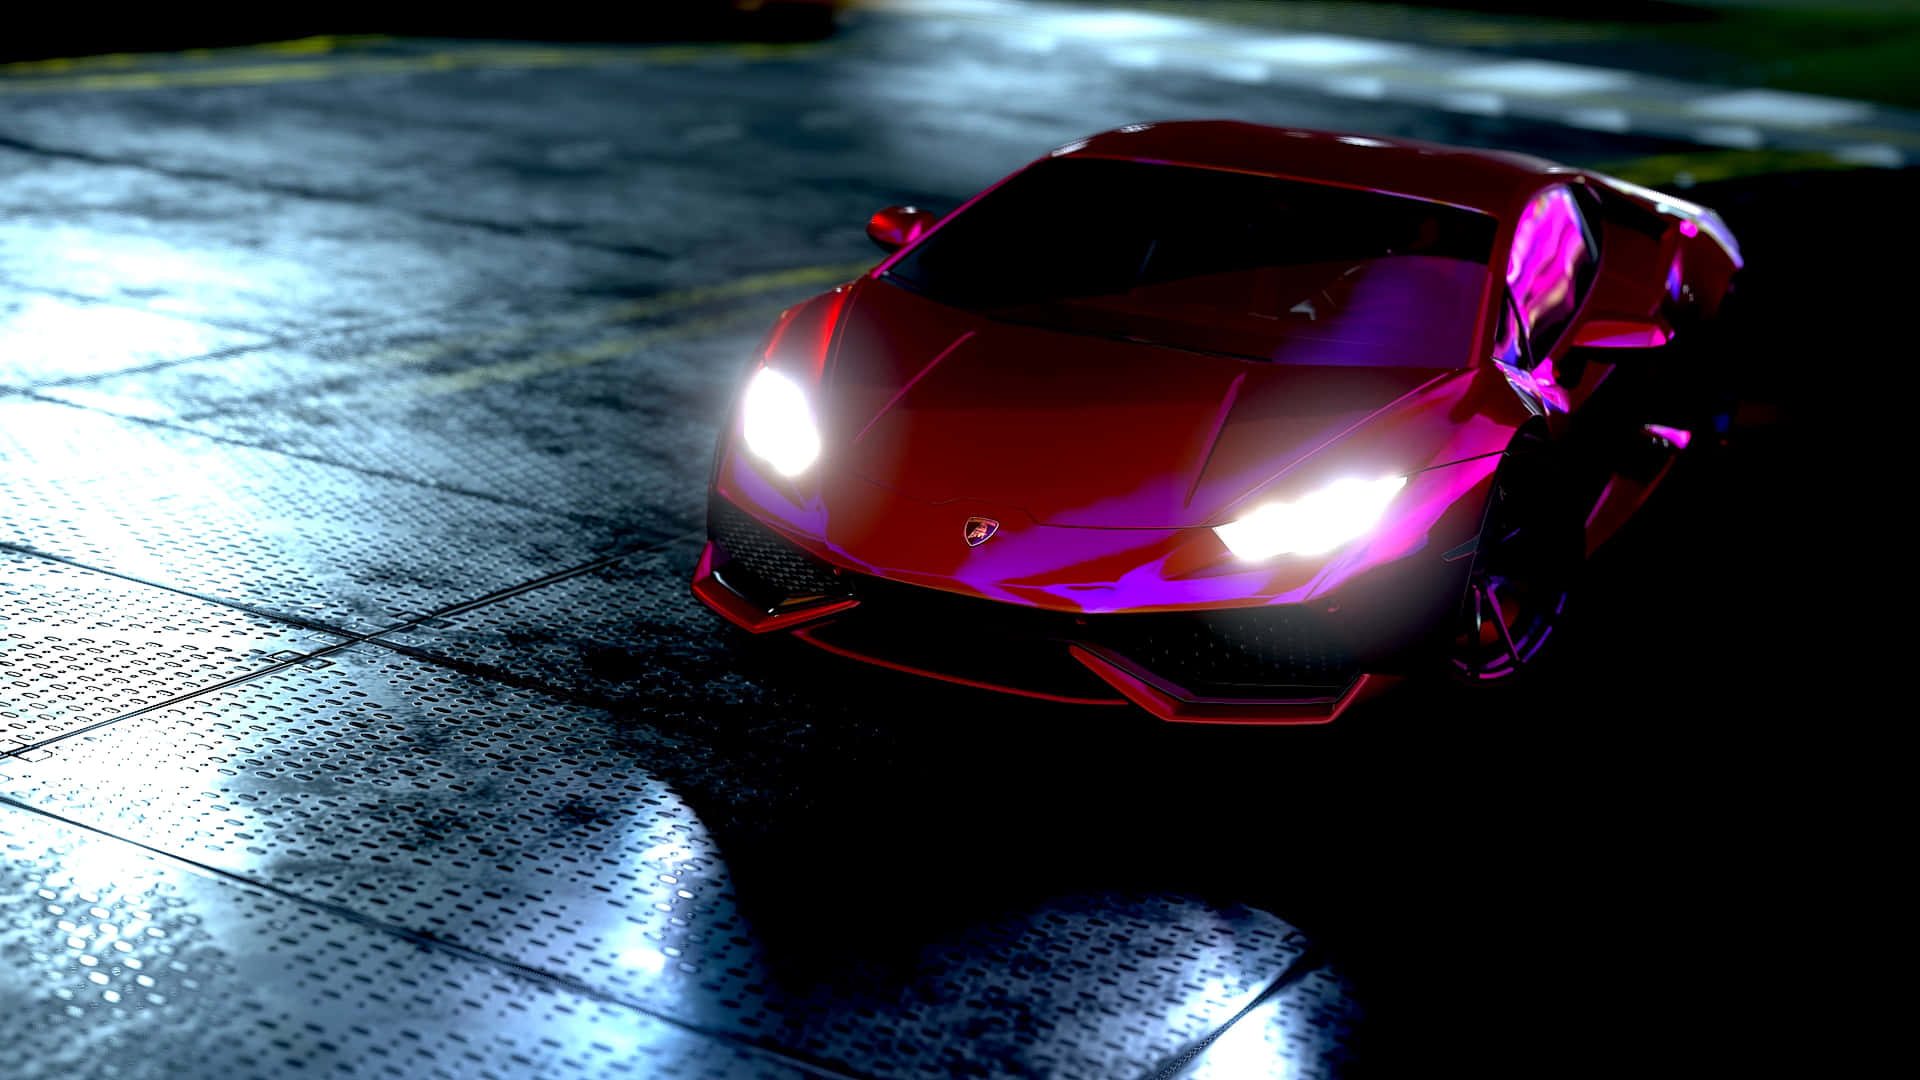 "Light Up the Night With This Neon Lamborghini" Wallpaper